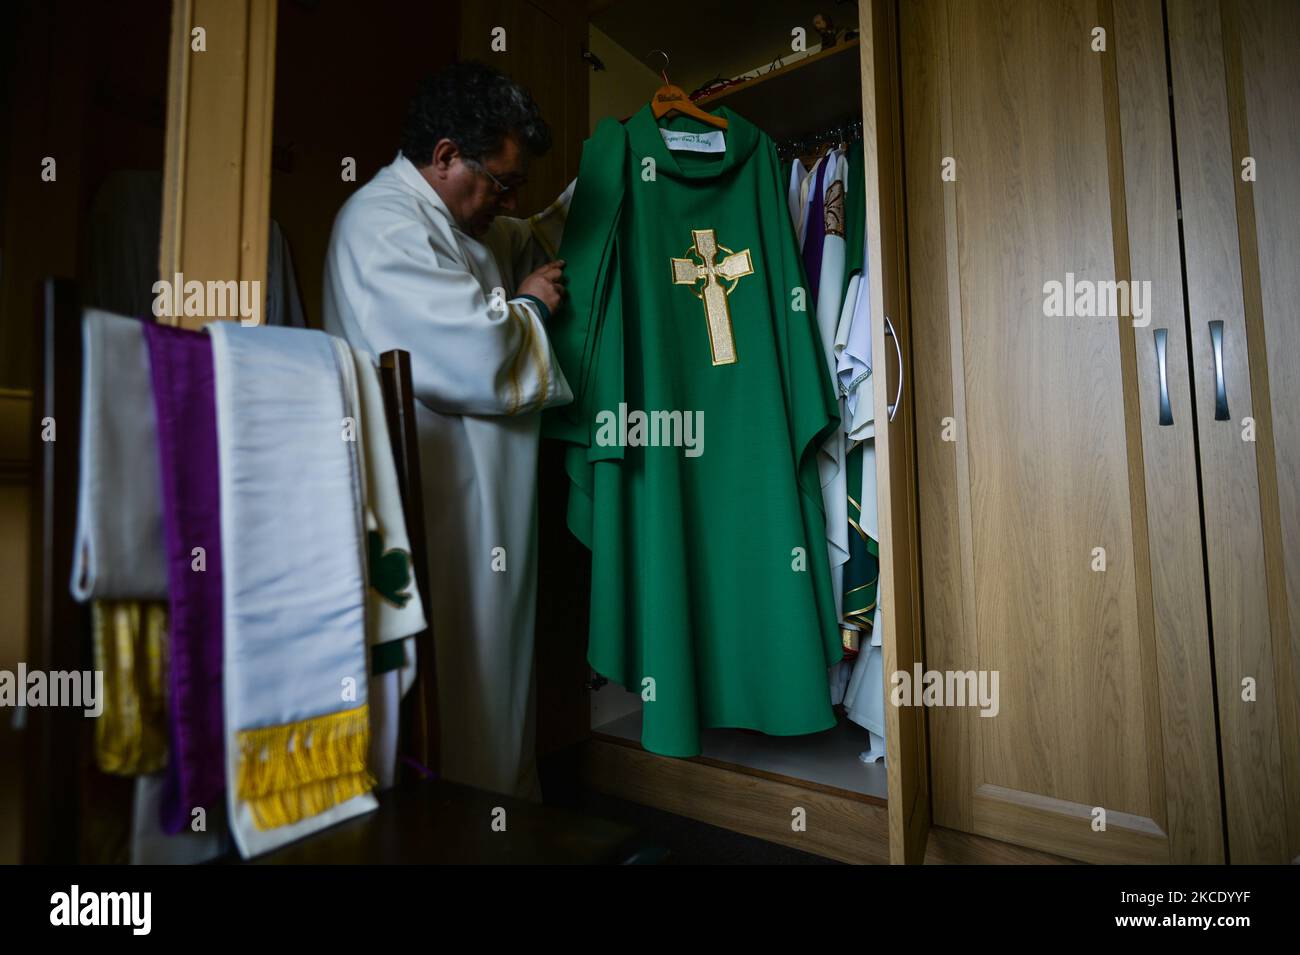 Father Krzysztof Sikora inspects the chasuble in the sacristy of the Roman Catholic Church 'Our Lady Star Of The Sea' in Roundstone, Connemara. Geographically, Roundstone parish is considered Ireland's largest parish and stretches from the Gurteen Beaches to the Twelve Bens and Mám Tuirc Mountains. Until the 1990s, the parish was served by three priests, now there is only one to look after five churches. The current Parish Priest, a Polish born Fr Krzysztof Sikora, is a member of the religious congregation of the Divine Word Missionaries. After years of working as a missionary in the Philippin Stock Photo